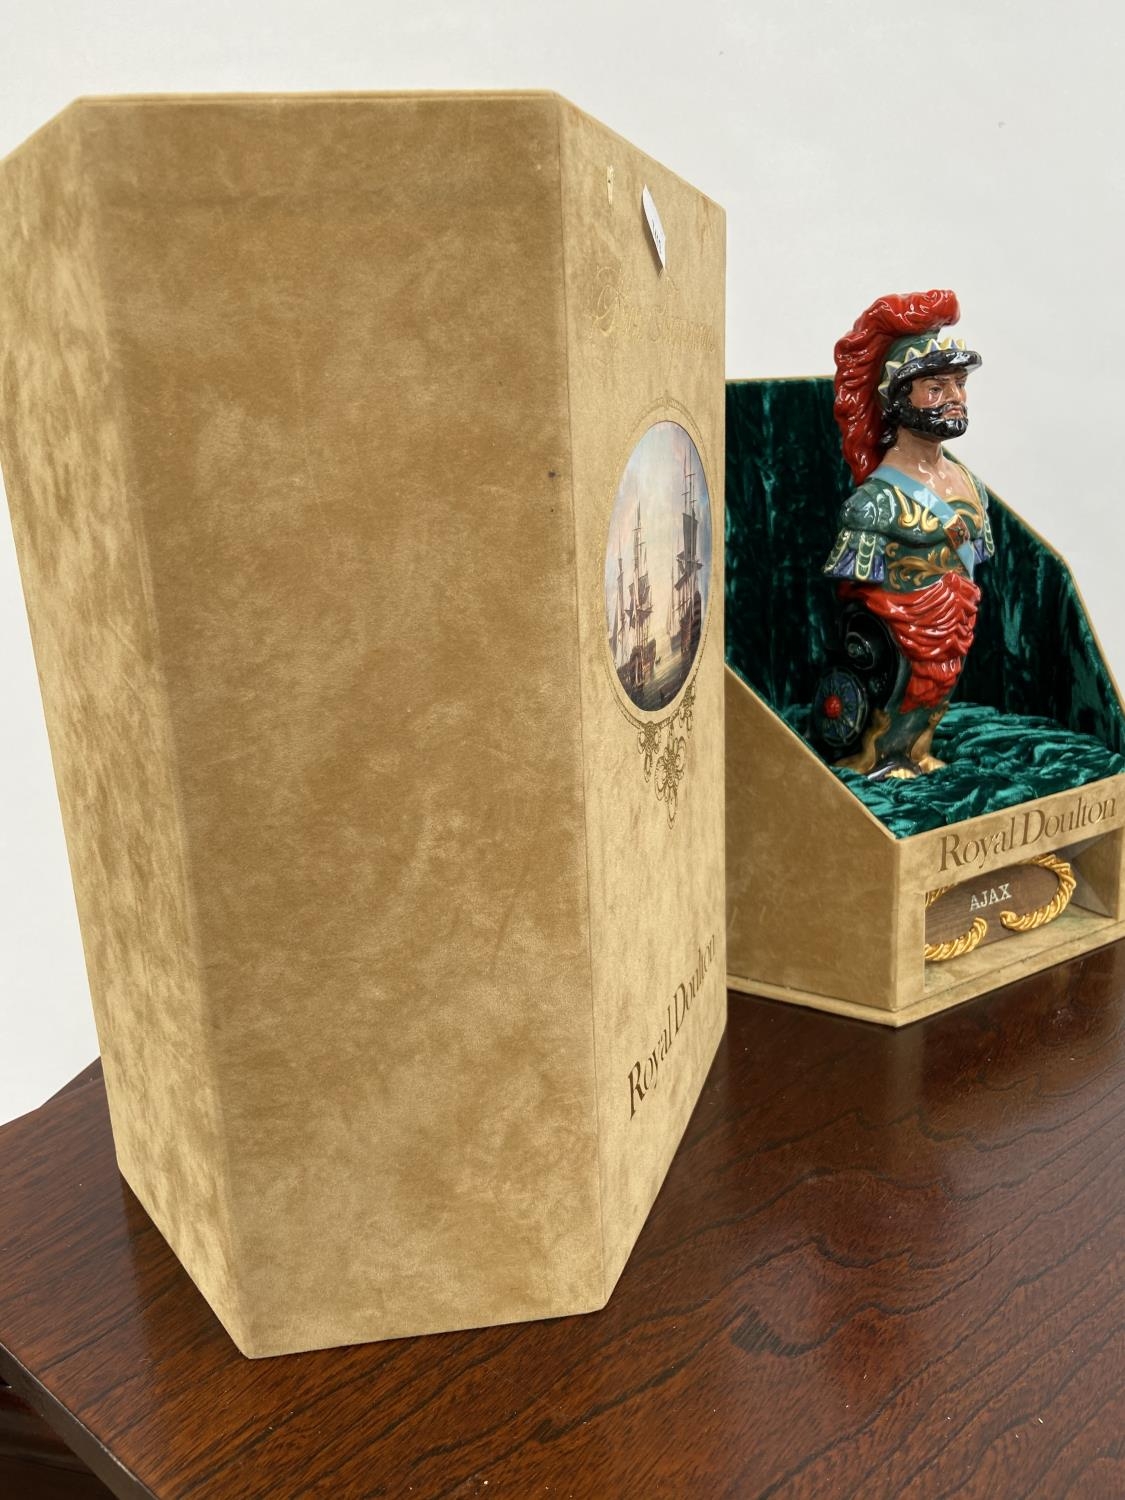 A Rare Royal Doulton Ships Figureheads bust titled 'Ajax' HN2908 [limited edition 69/950] comes with - Image 5 of 6